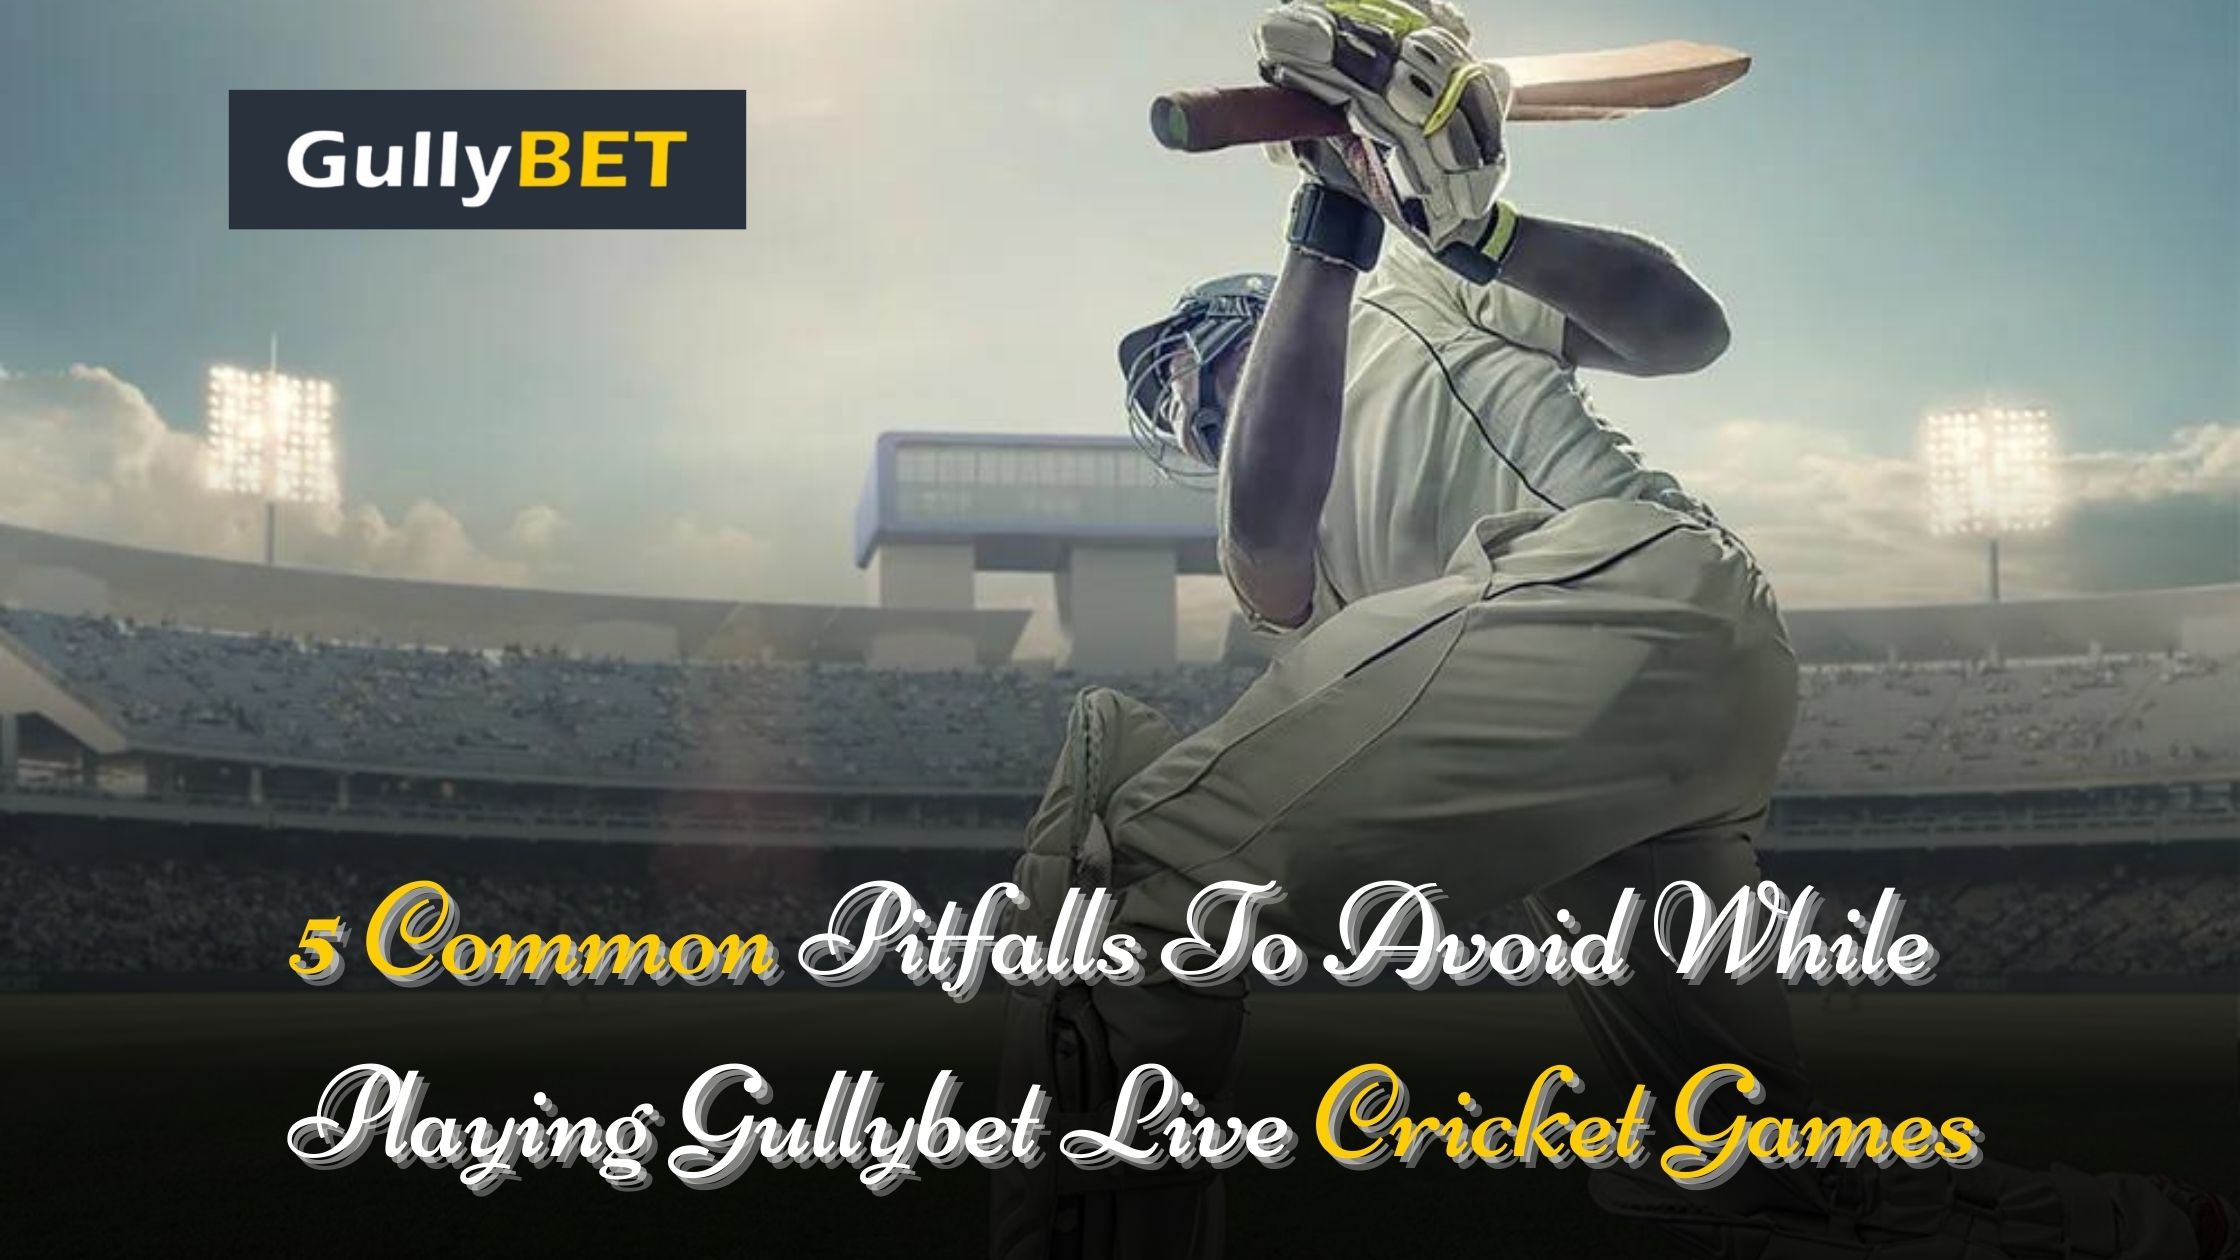 Gullybet live cricket games